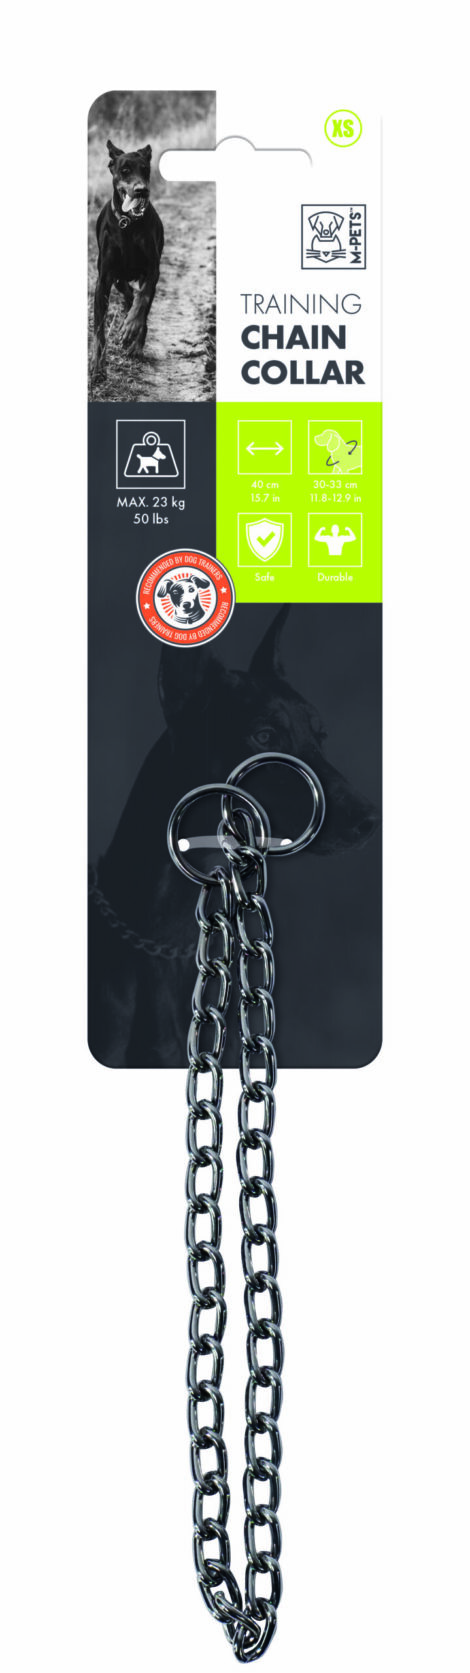 M-PETS_10830811_TRAINING Chain collar XS_#01.indd